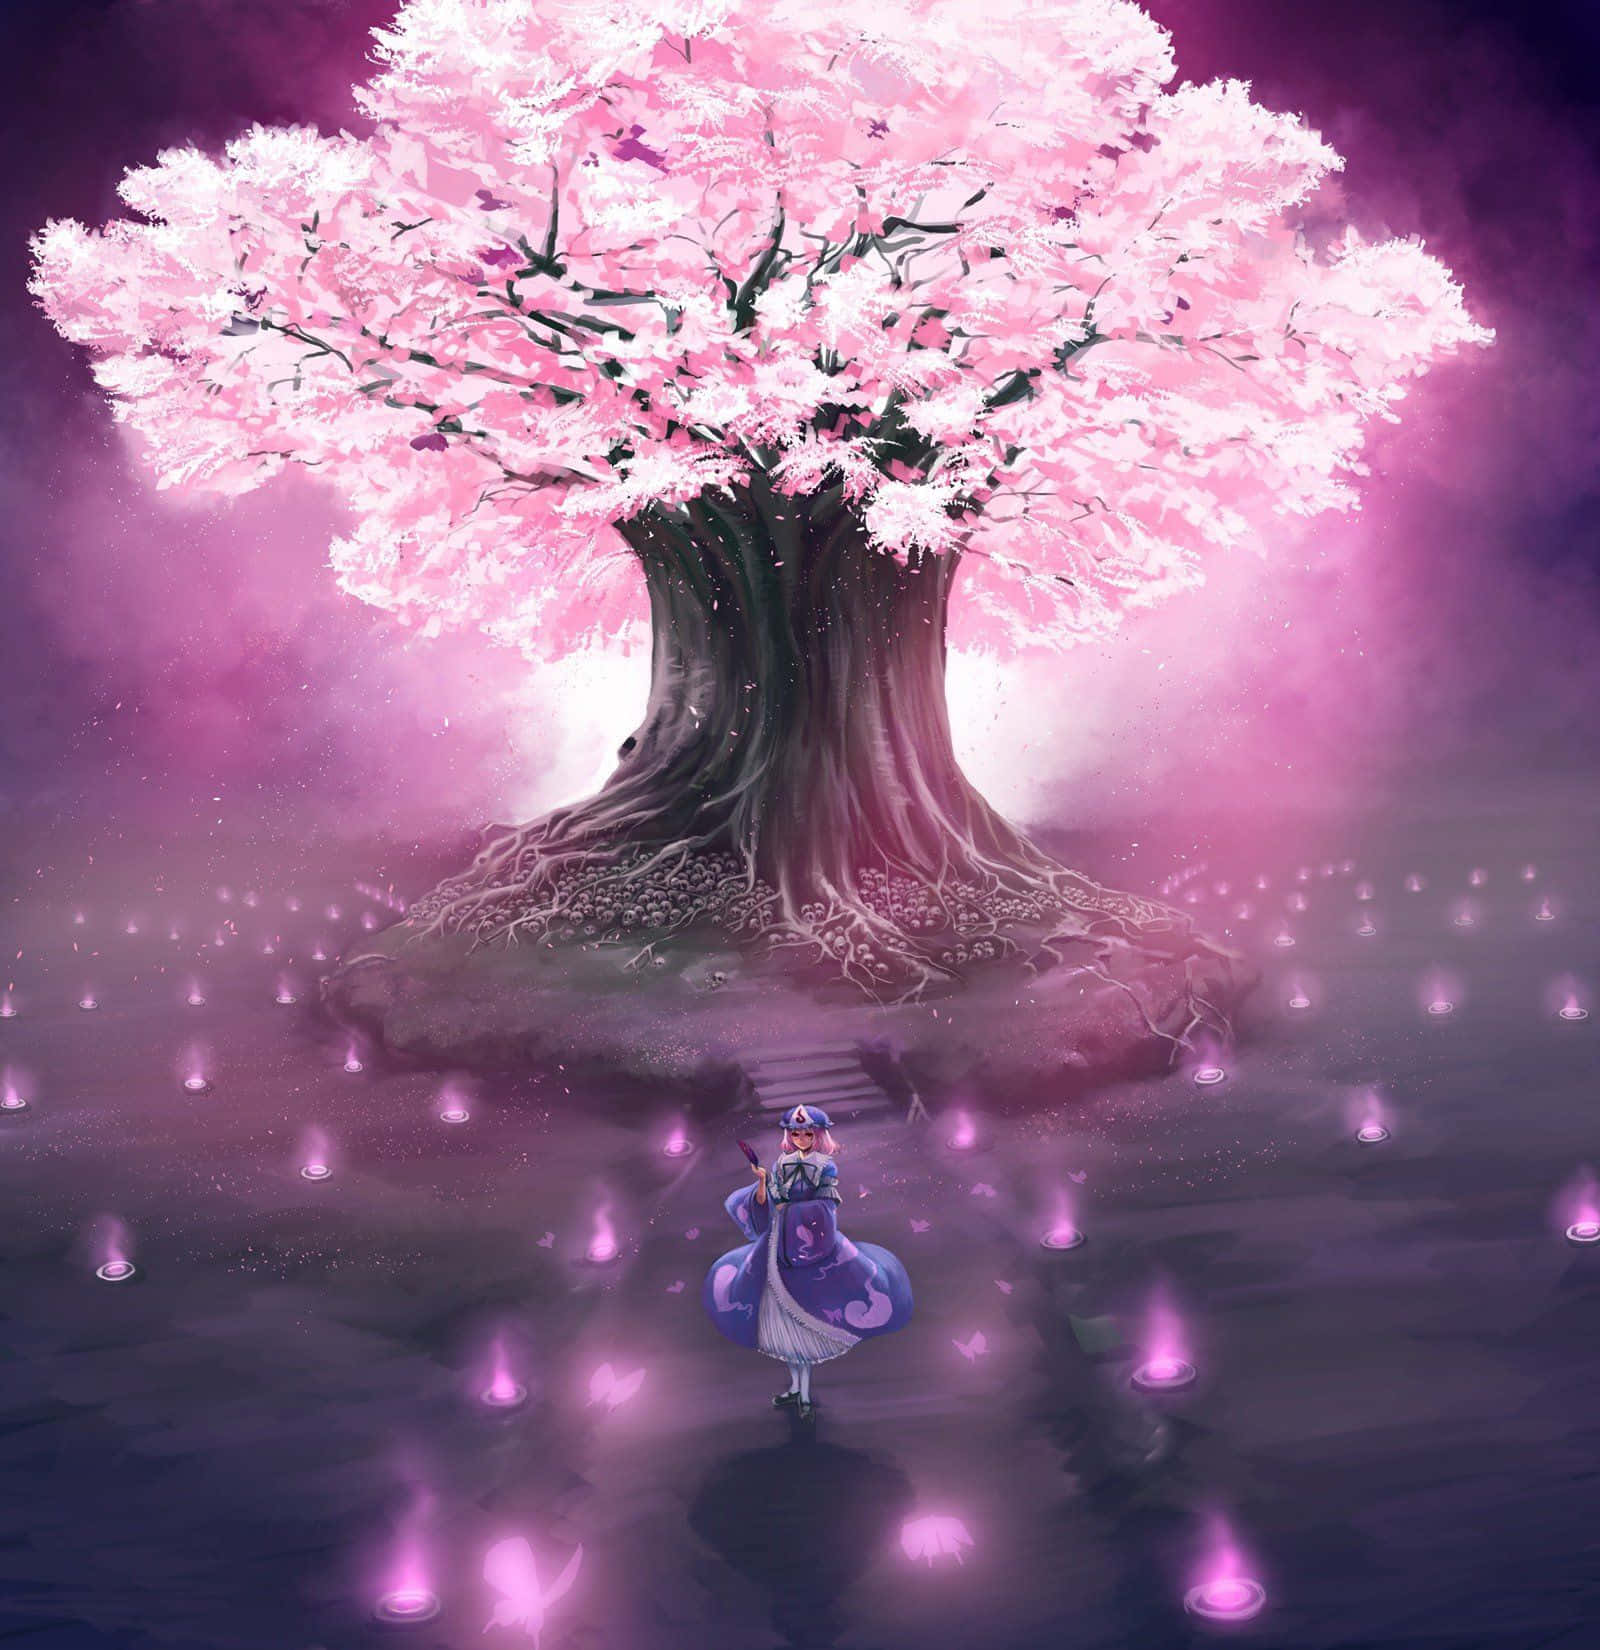 99 Tree Live Wallpapers, Animated Wallpapers - MoeWalls